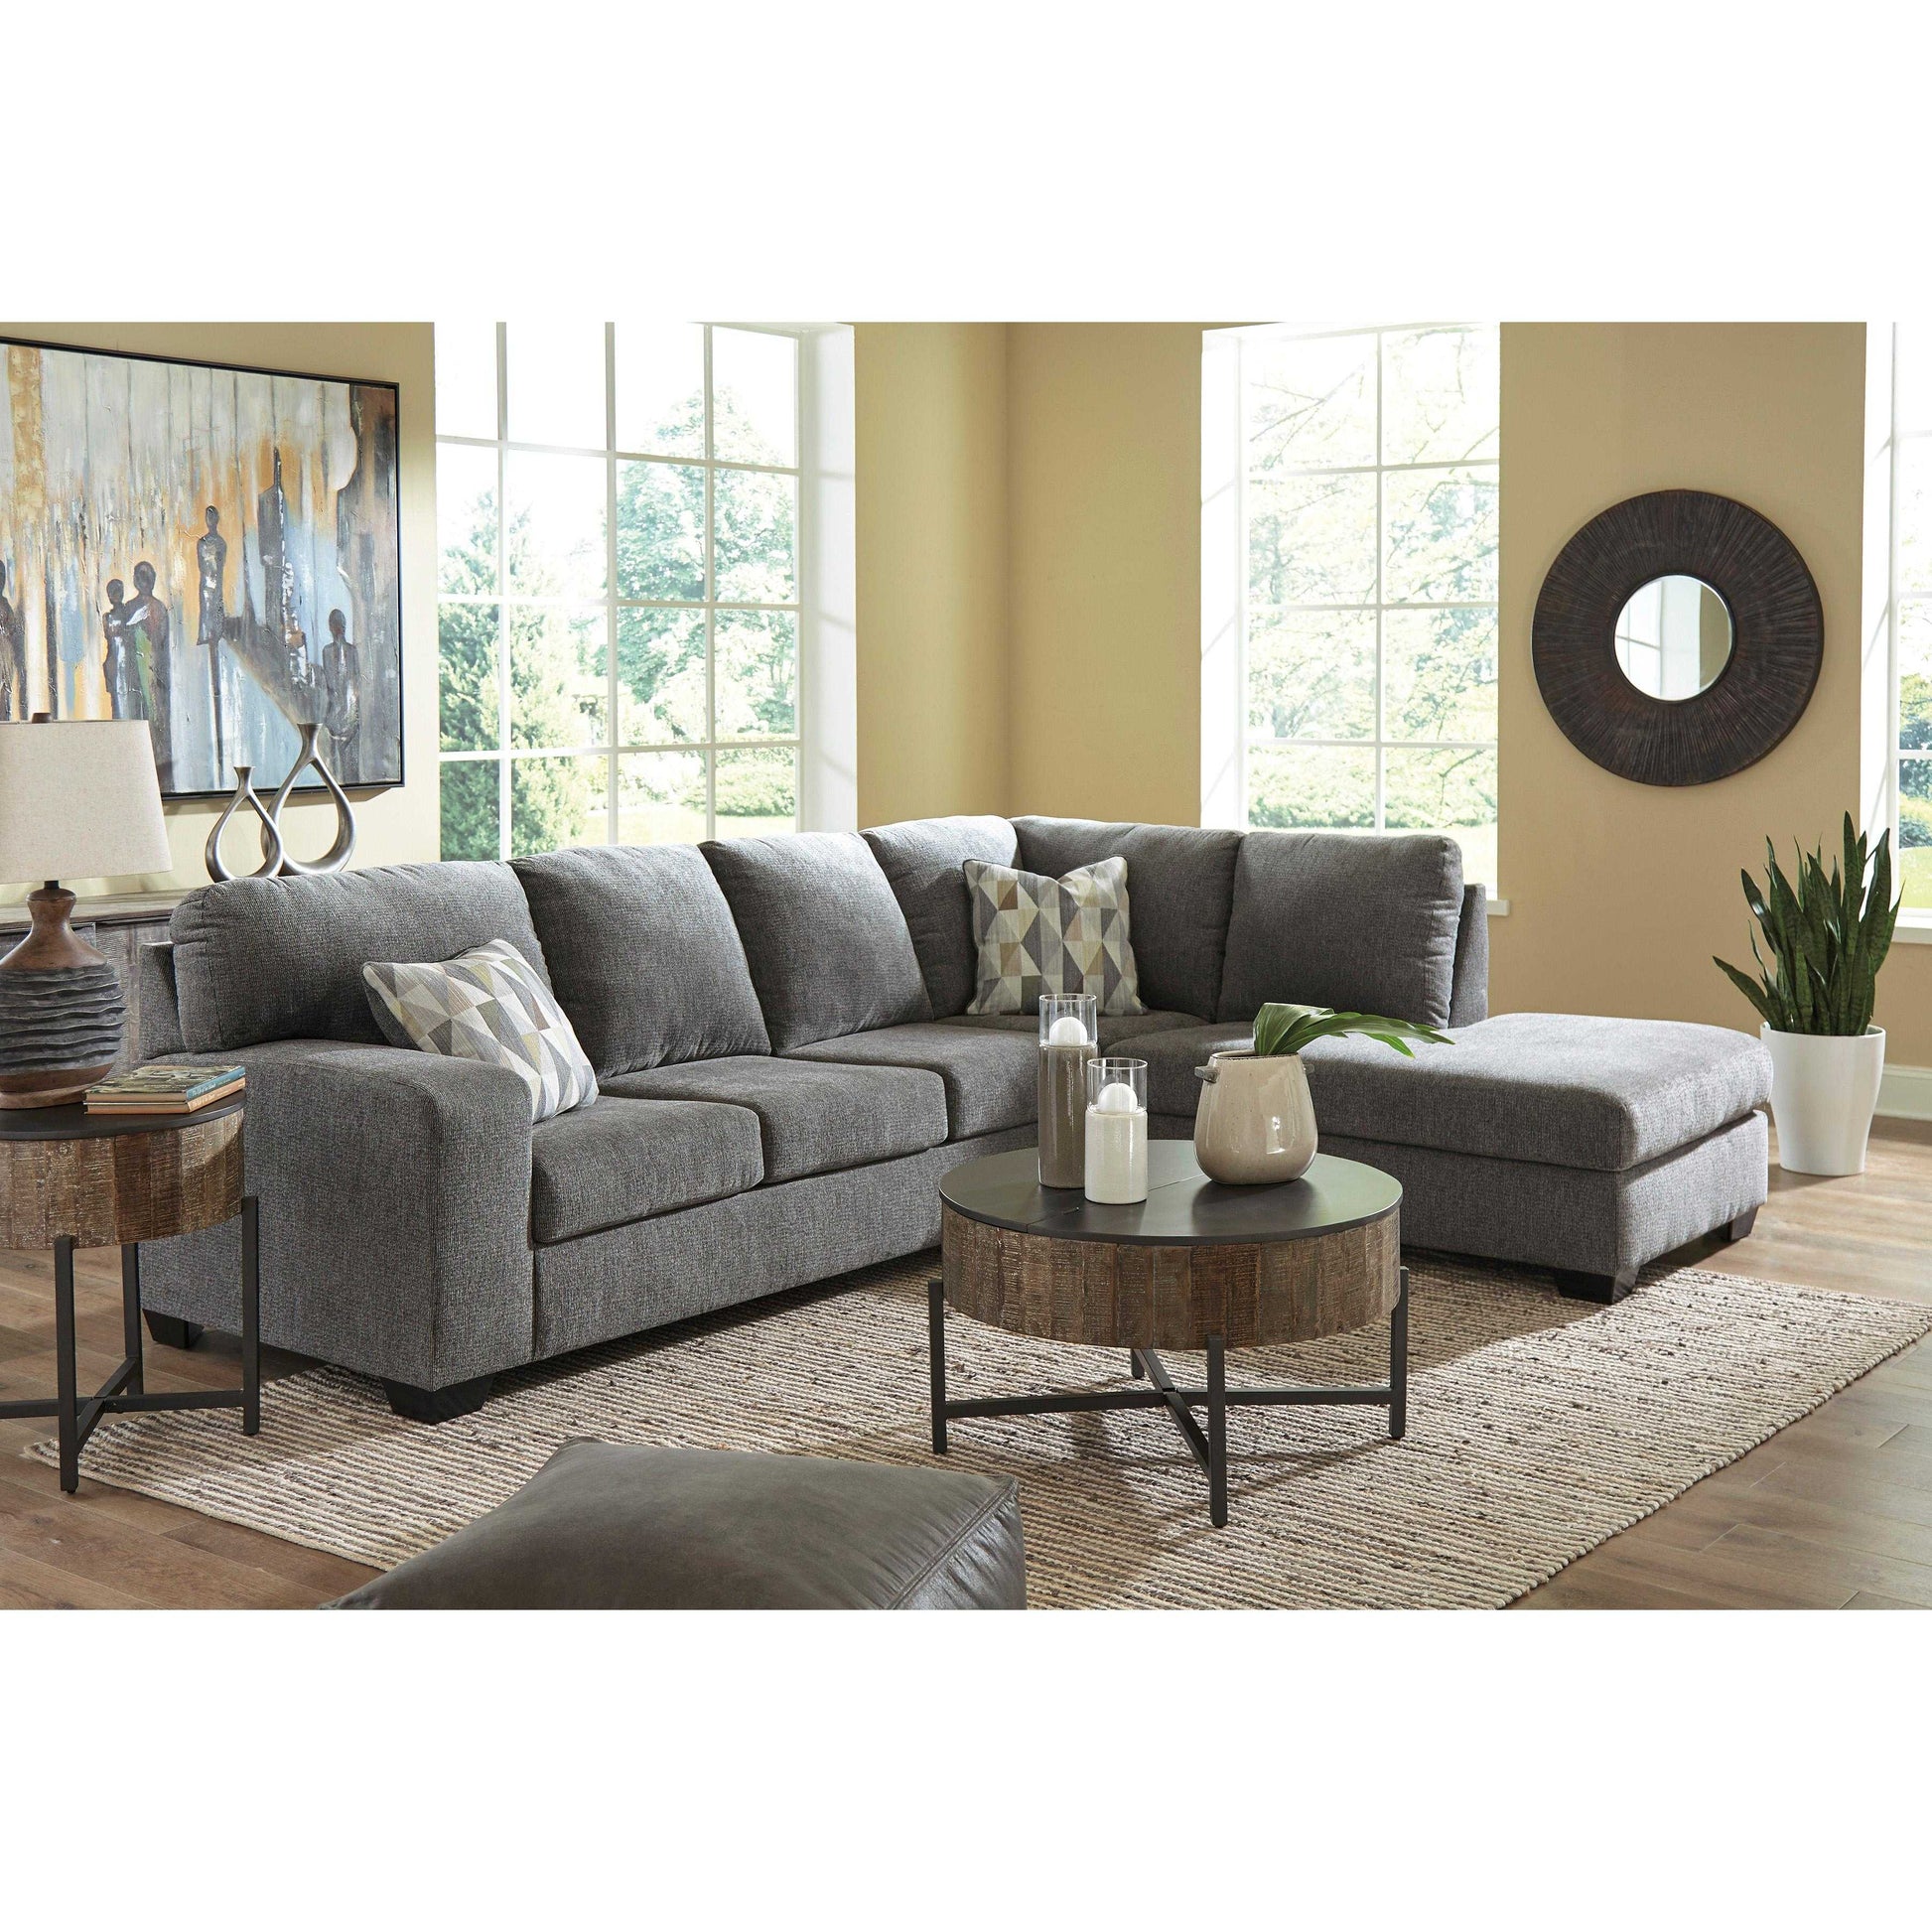 Benchcraft Dalhart Fabric 2 pc Sectional 8570366/8570317